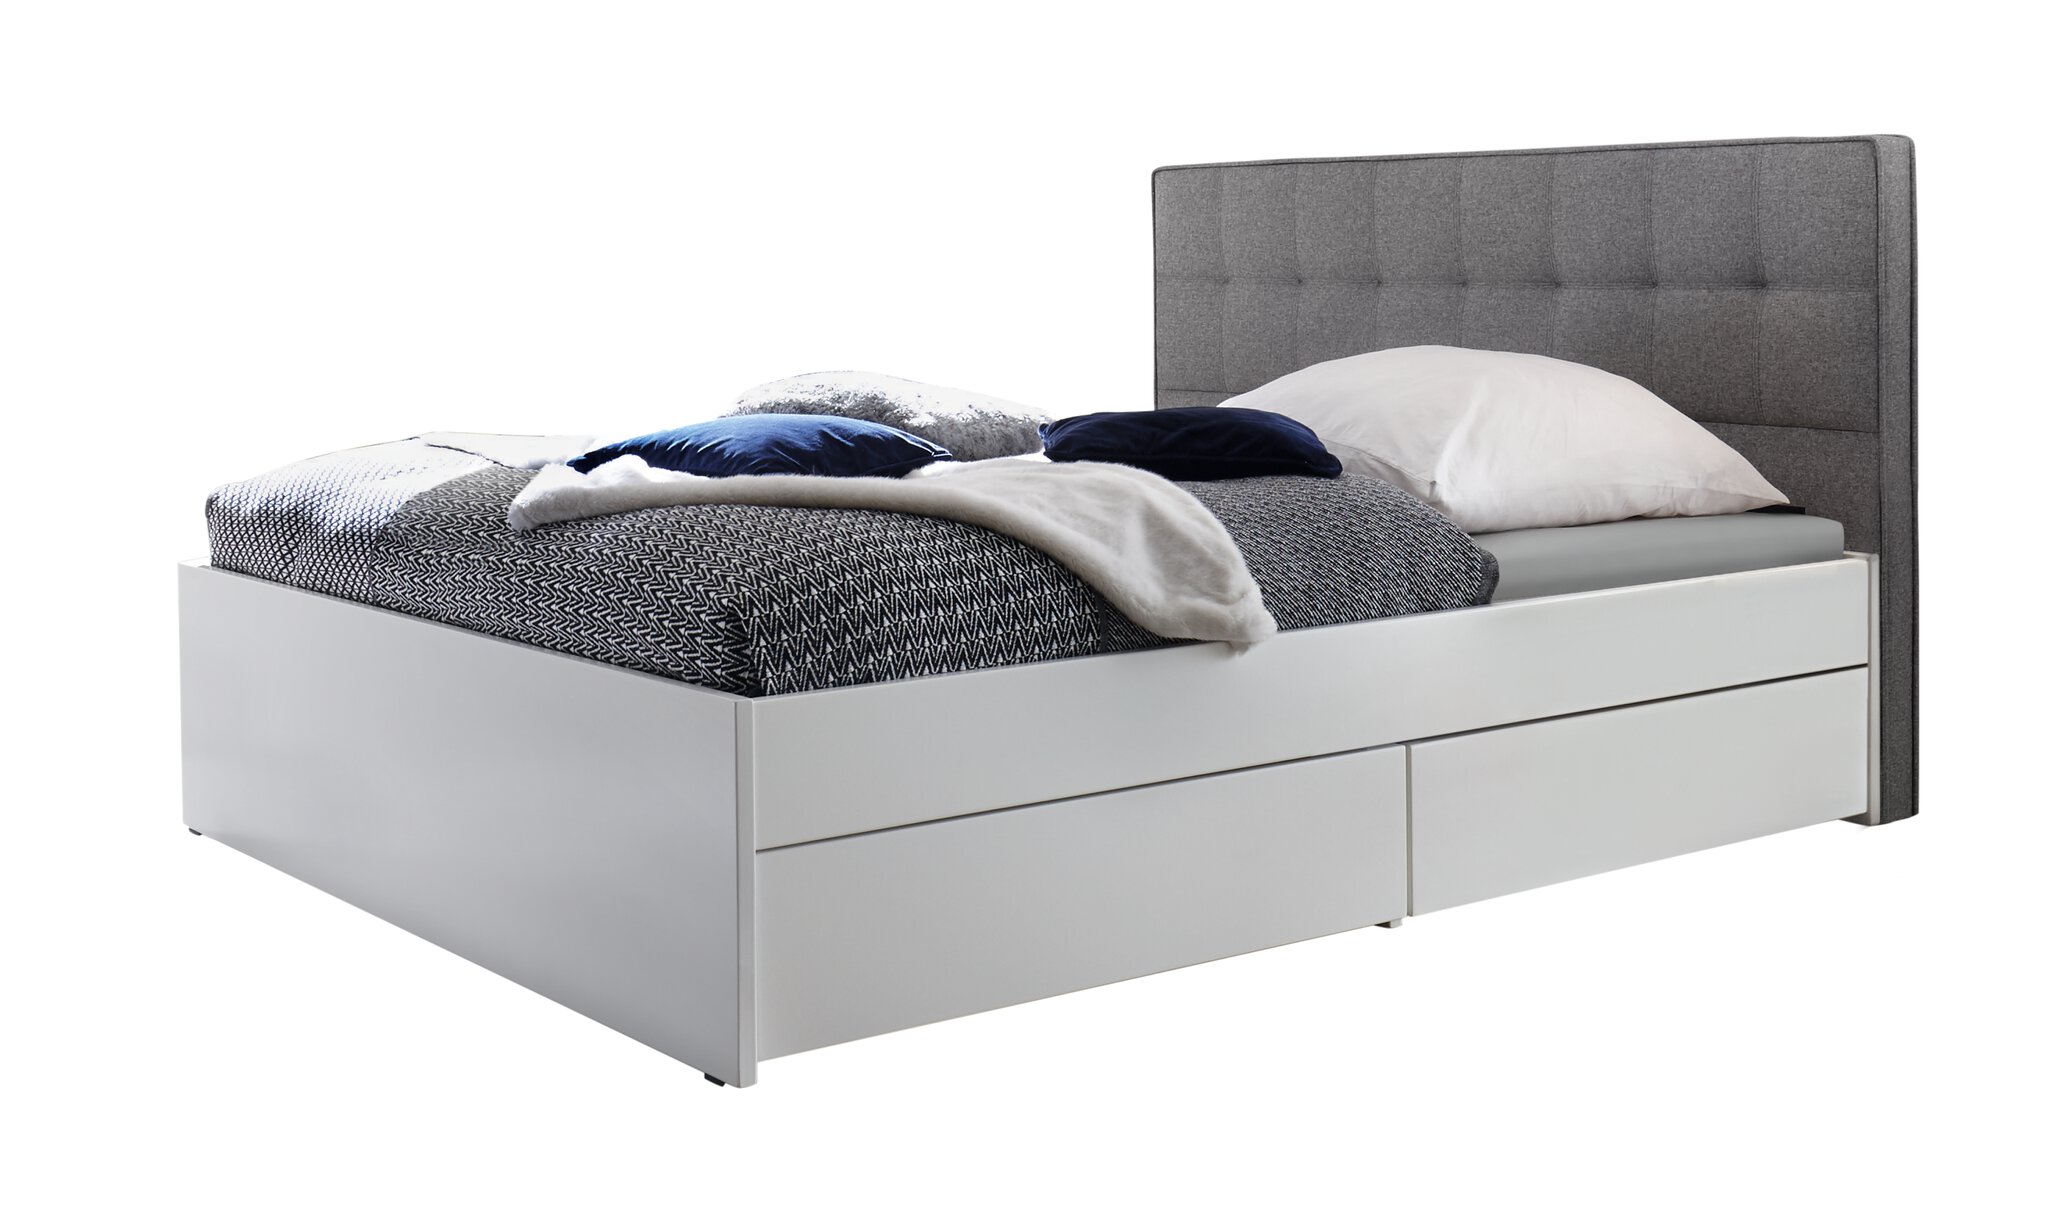 headboards, panels to | Accessories beds, wall HASENA